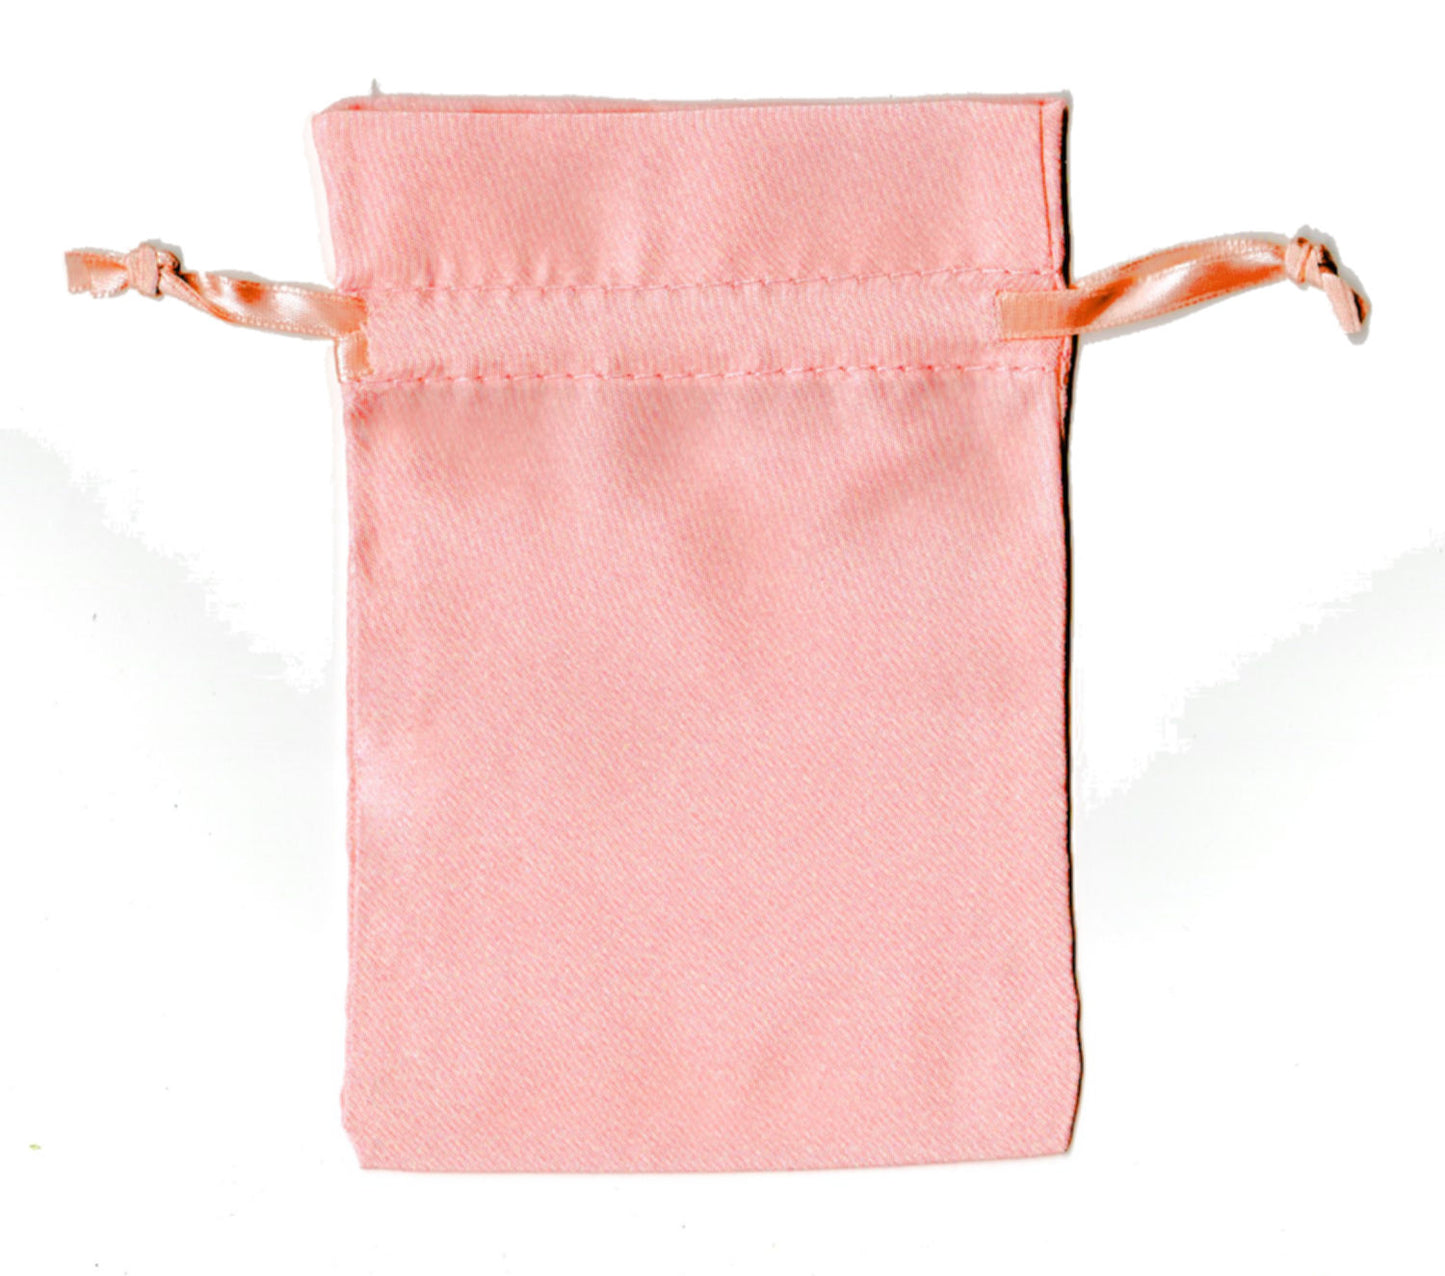 Personalized Satin Bags - 4 x 6" - 25 Bags